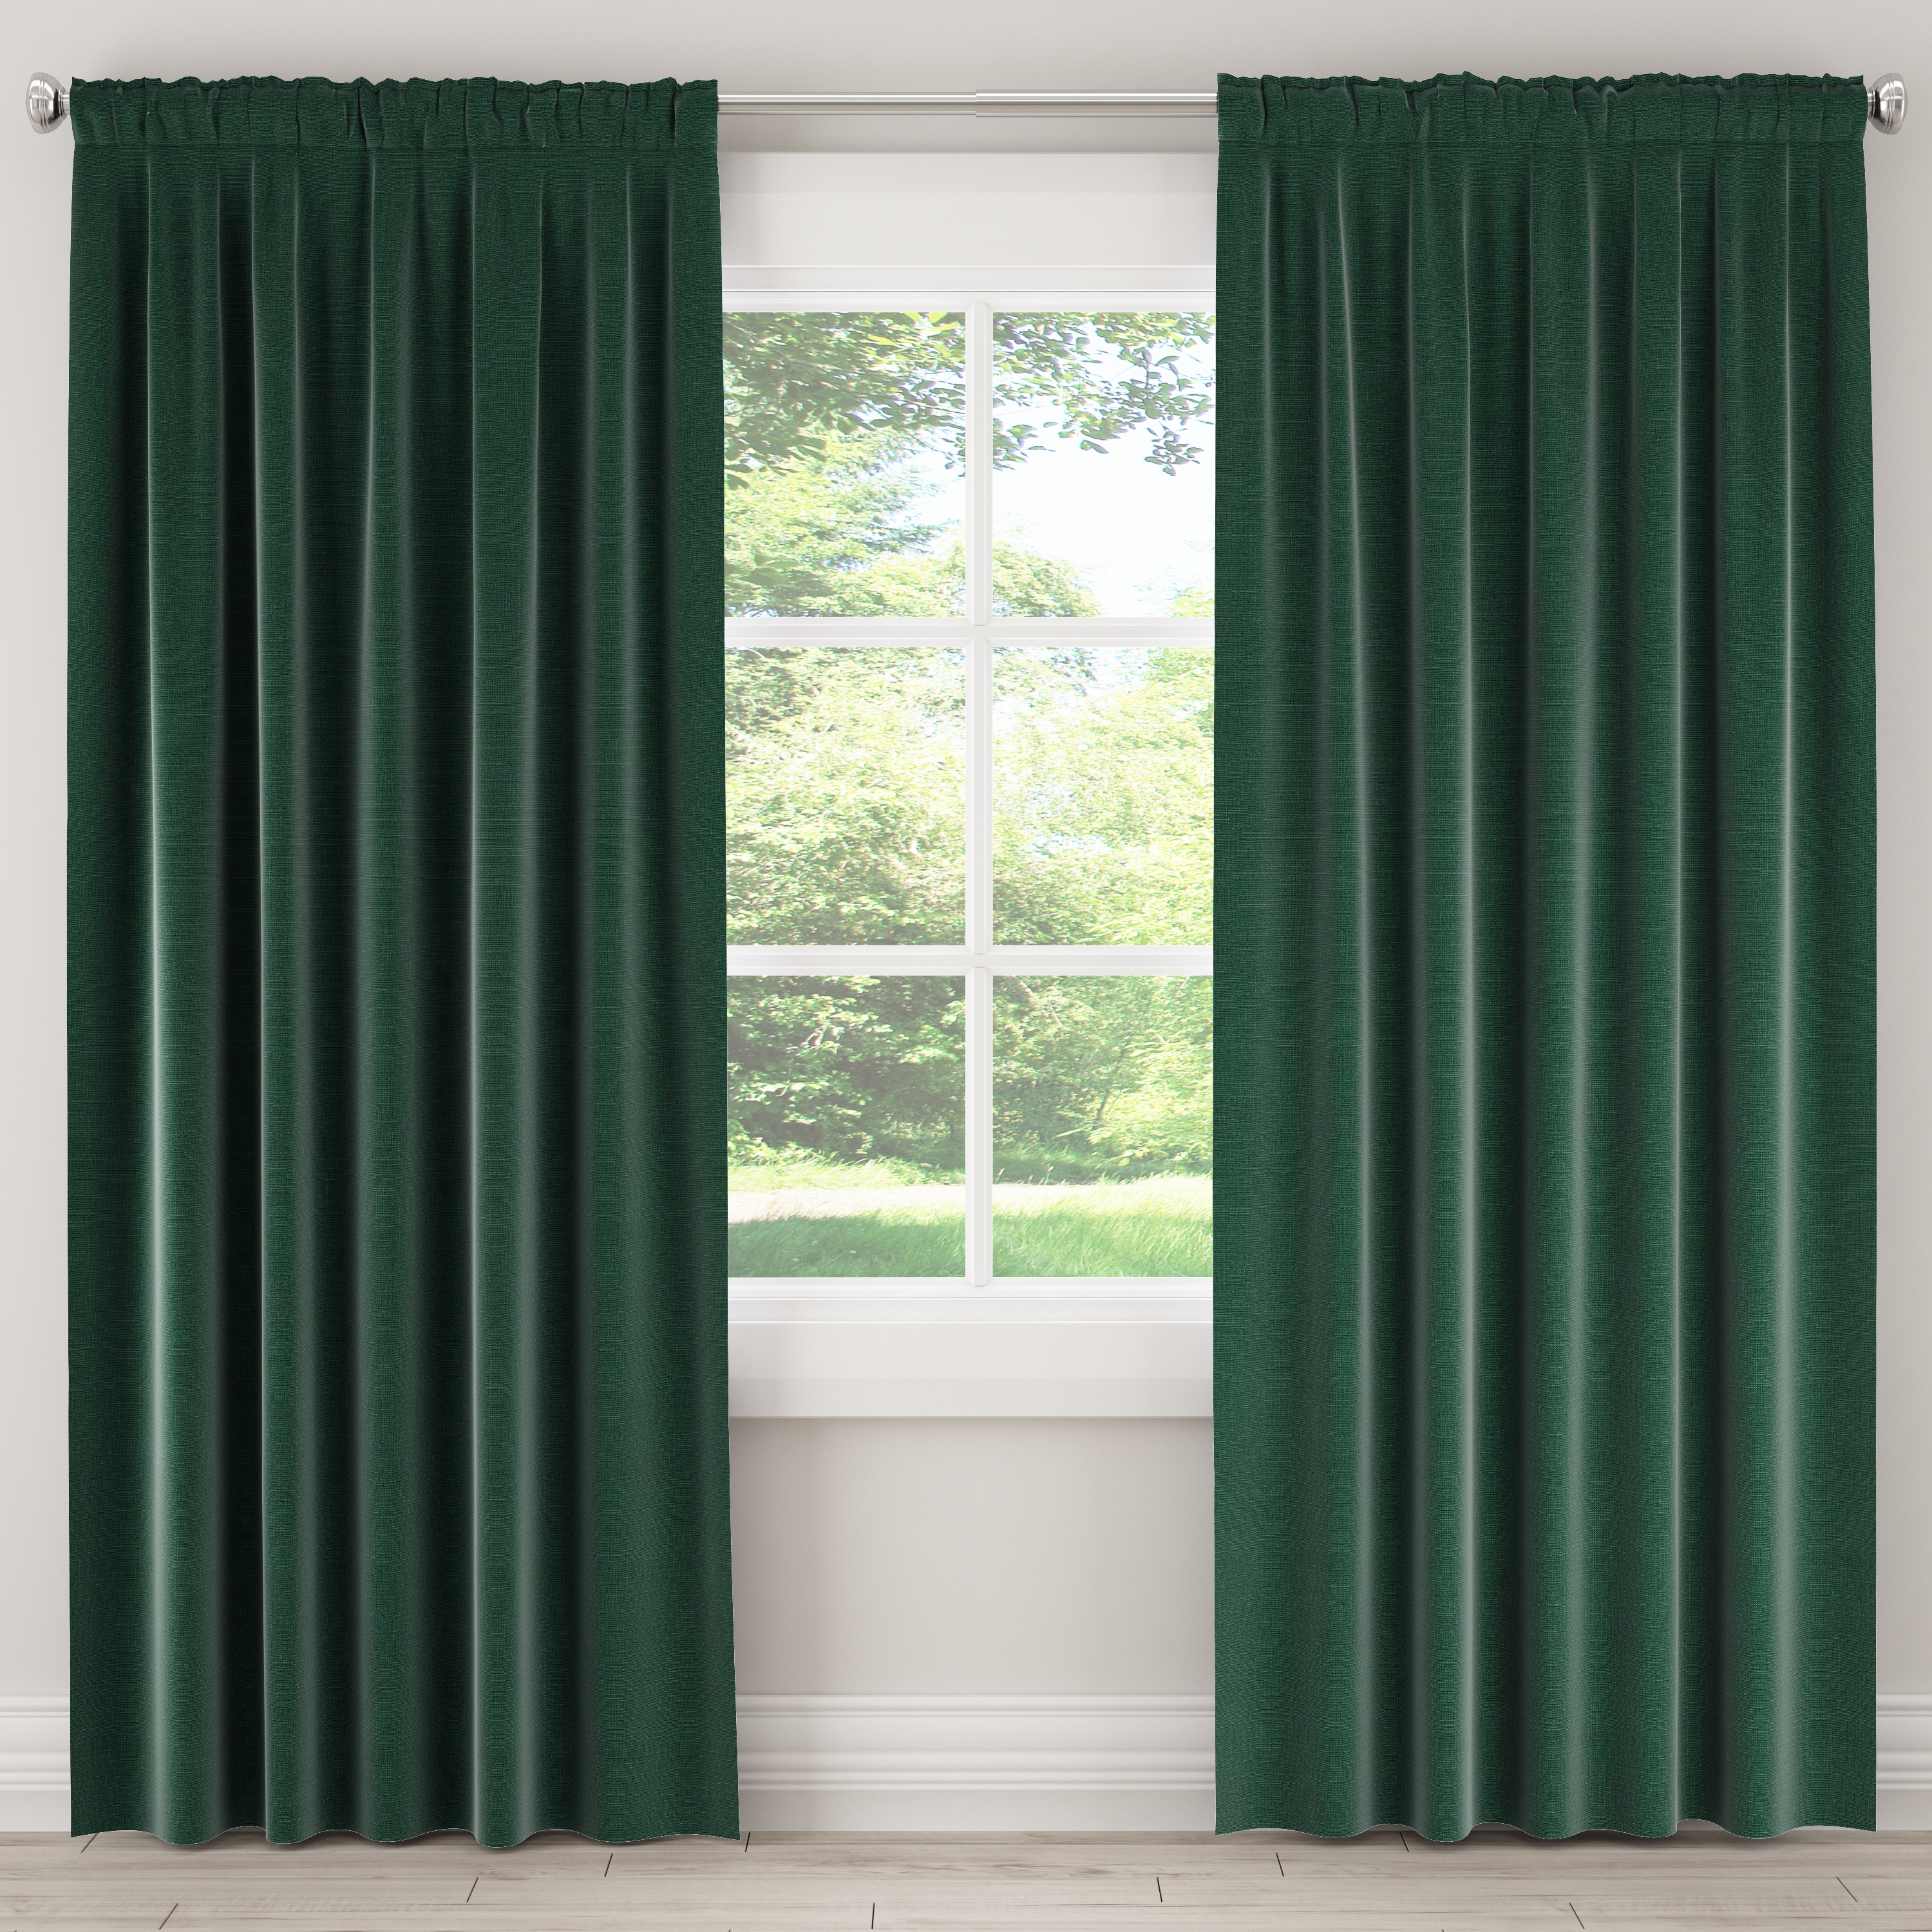 Conifer Green Curtain Panel, 108" x 50" Unlined - Image 2